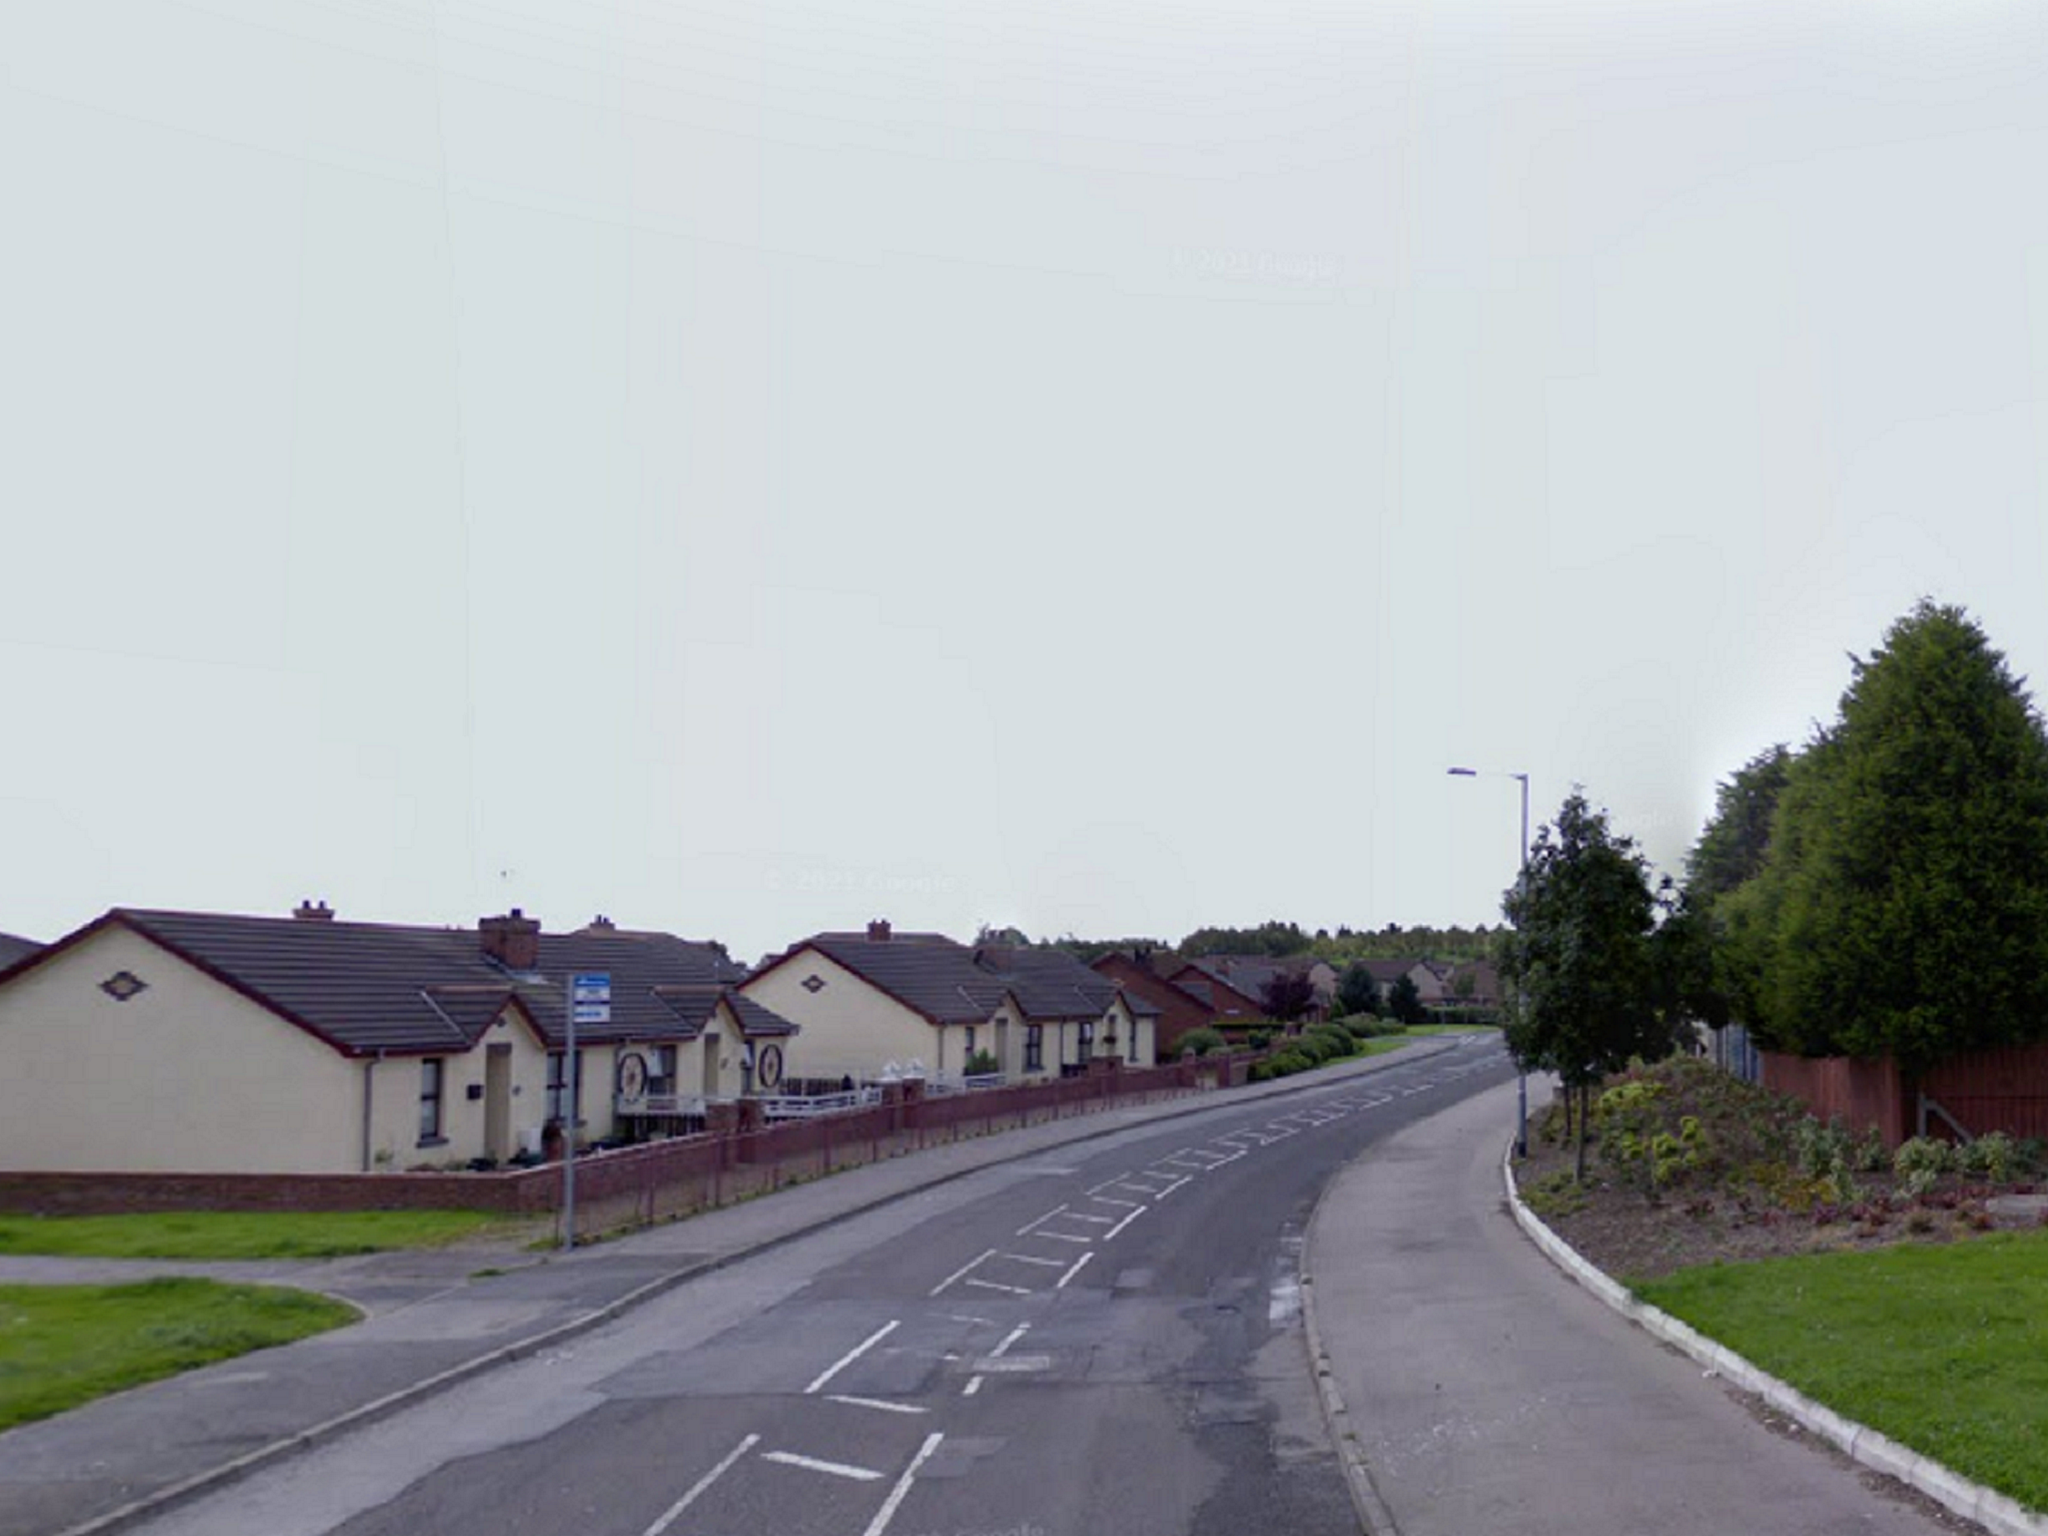 A bus was hijacked and set alight by two armed and masked men in Newtownards, Northern Ireland